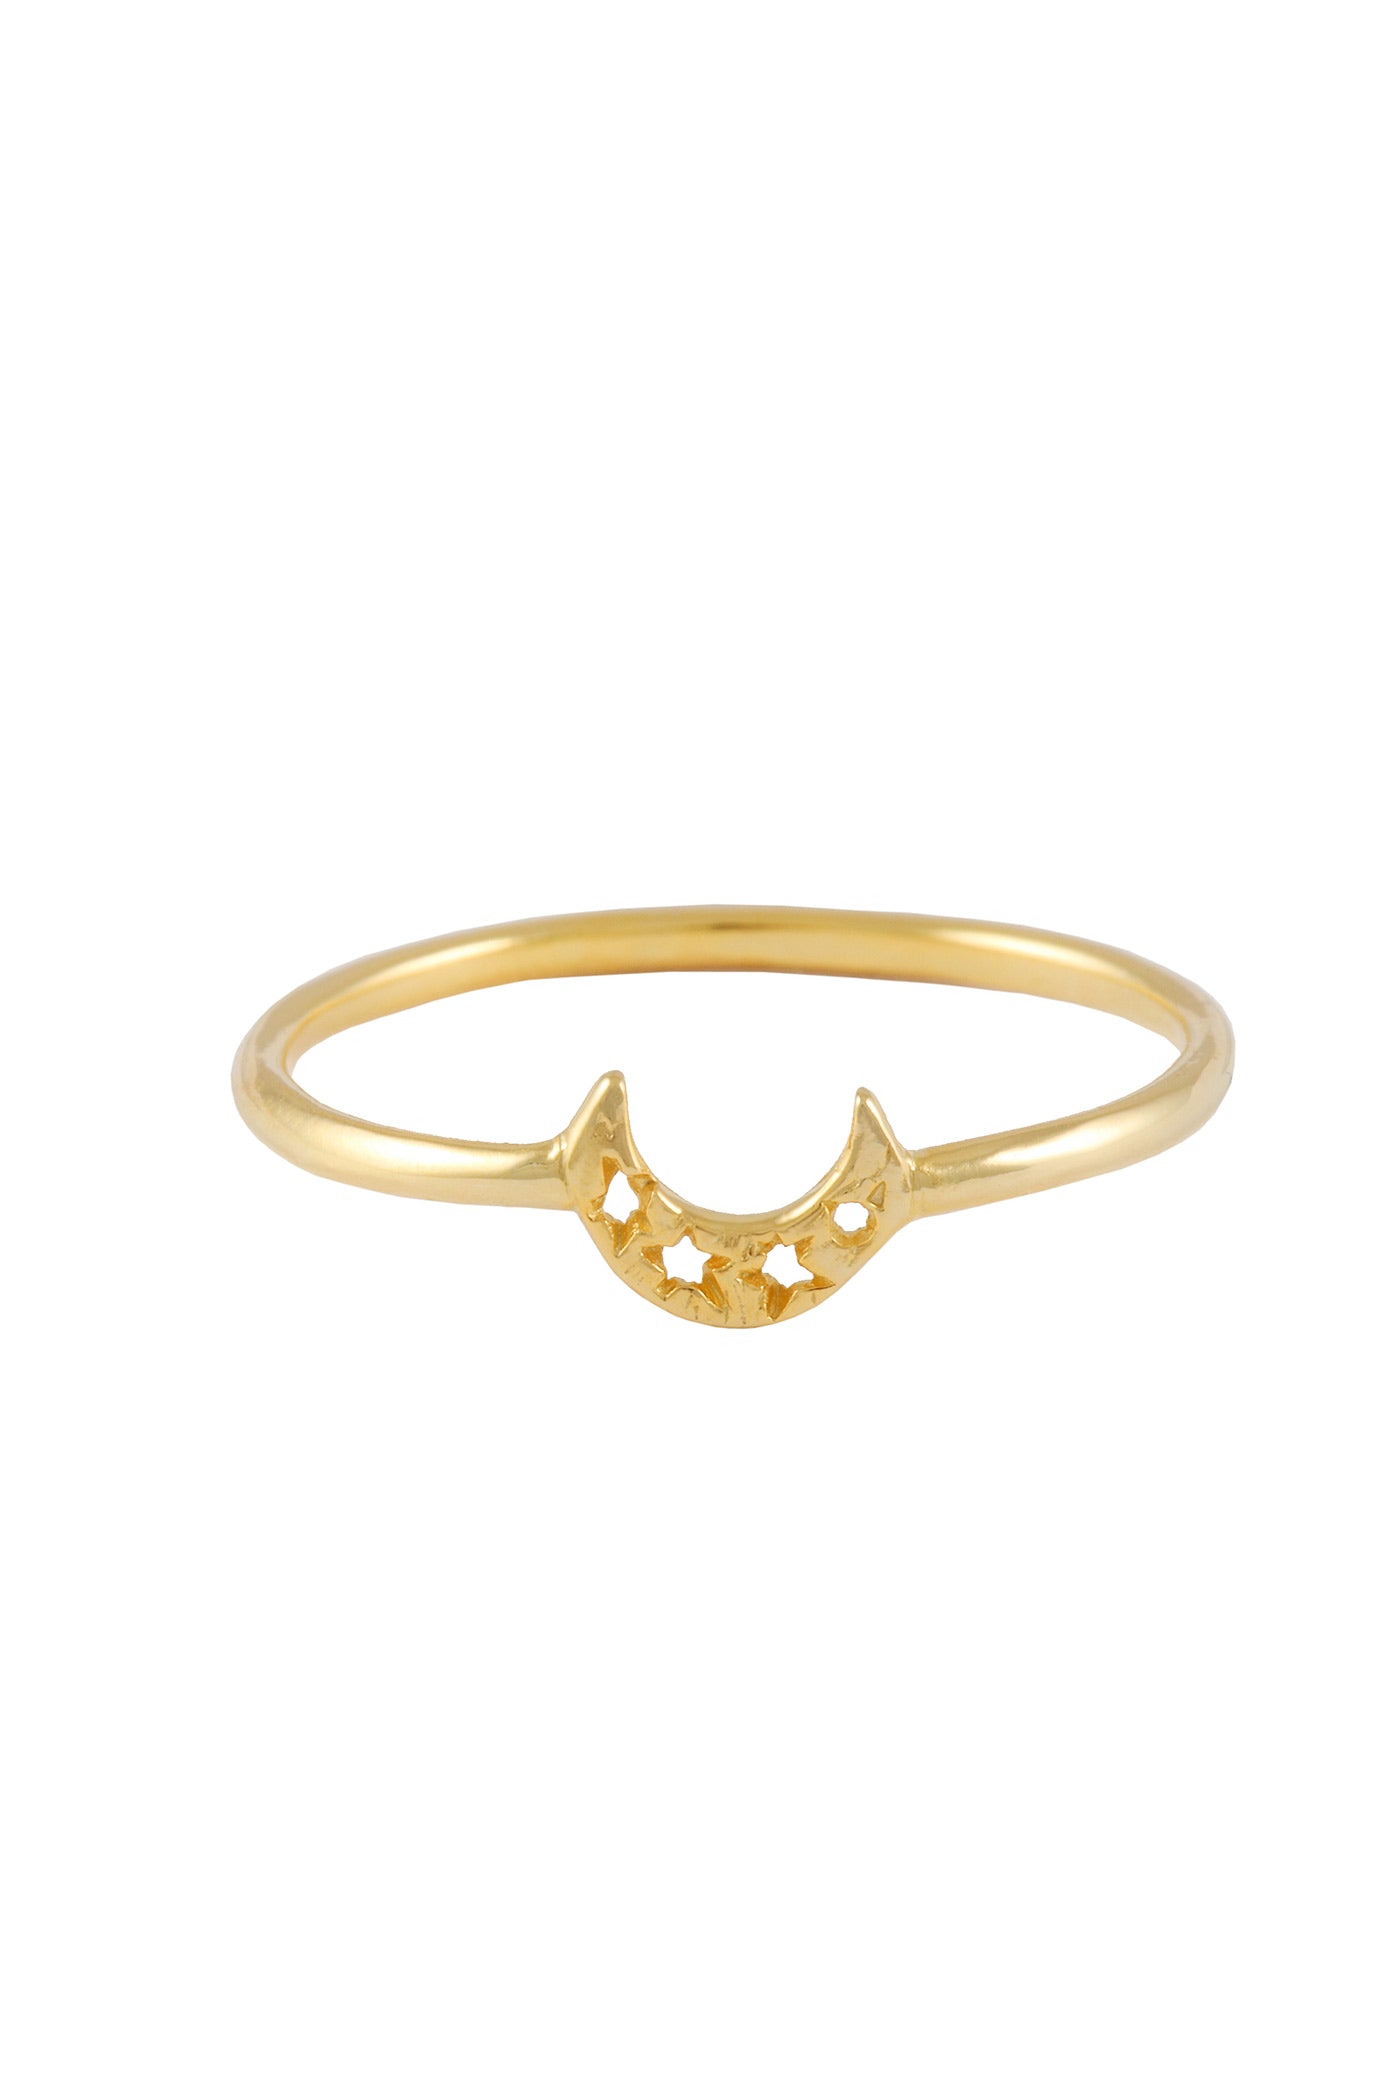 Small Crescent Moon ring. Silver, gold-plated